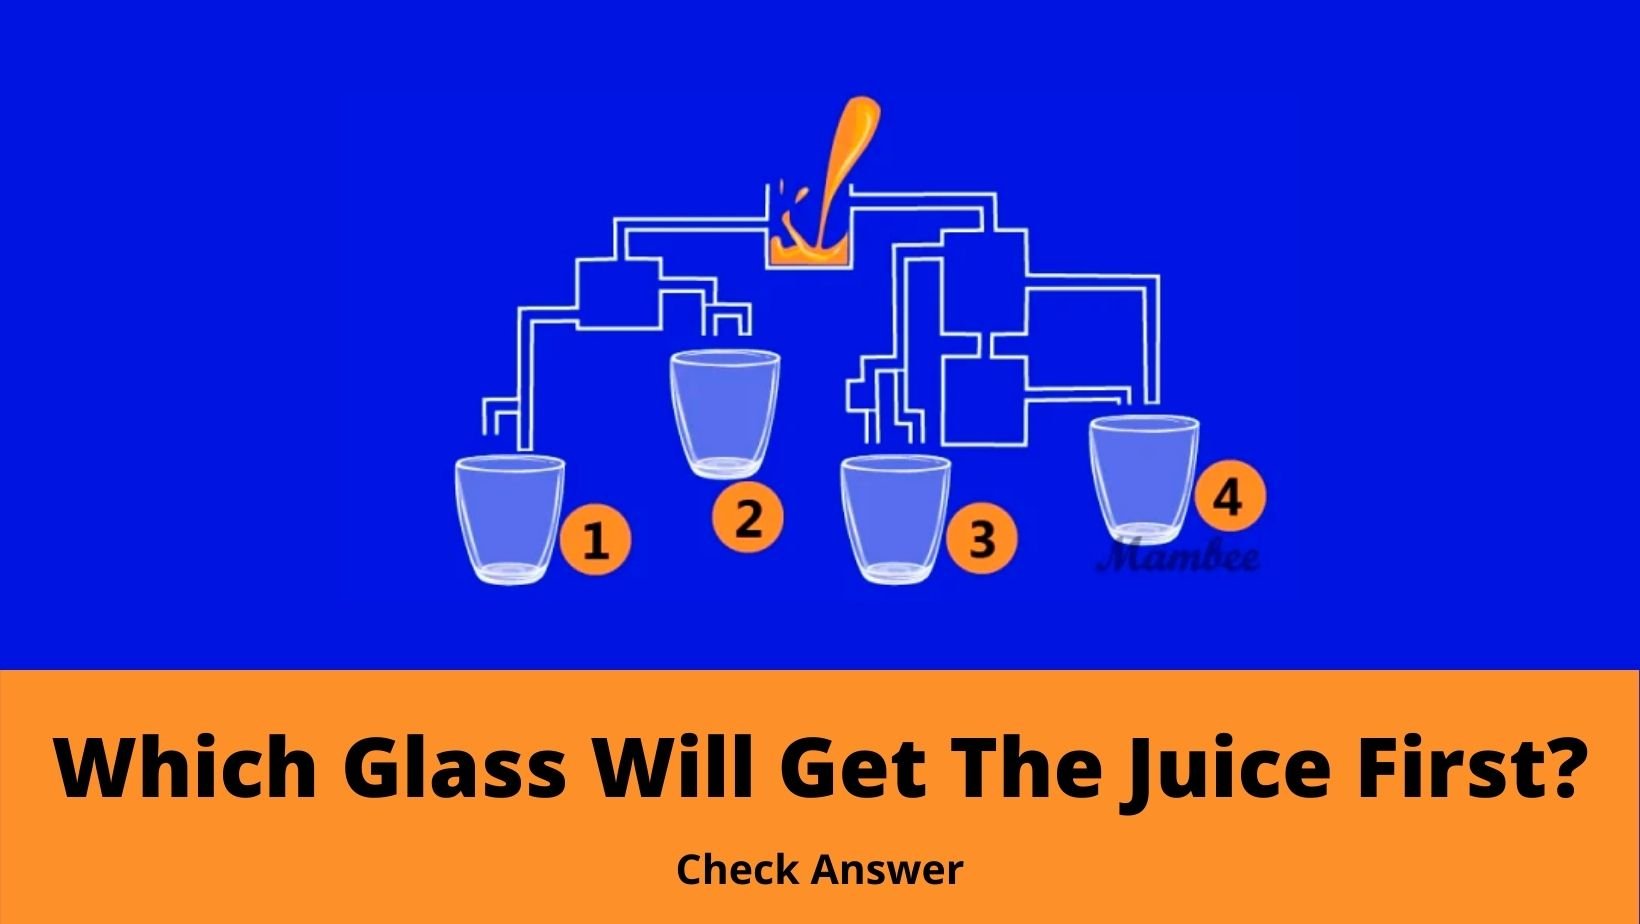 cover 12.jpg?resize=412,232 - Which Glass Do You Think Will Get The Juice First? 1, 2, 3 Or 4?